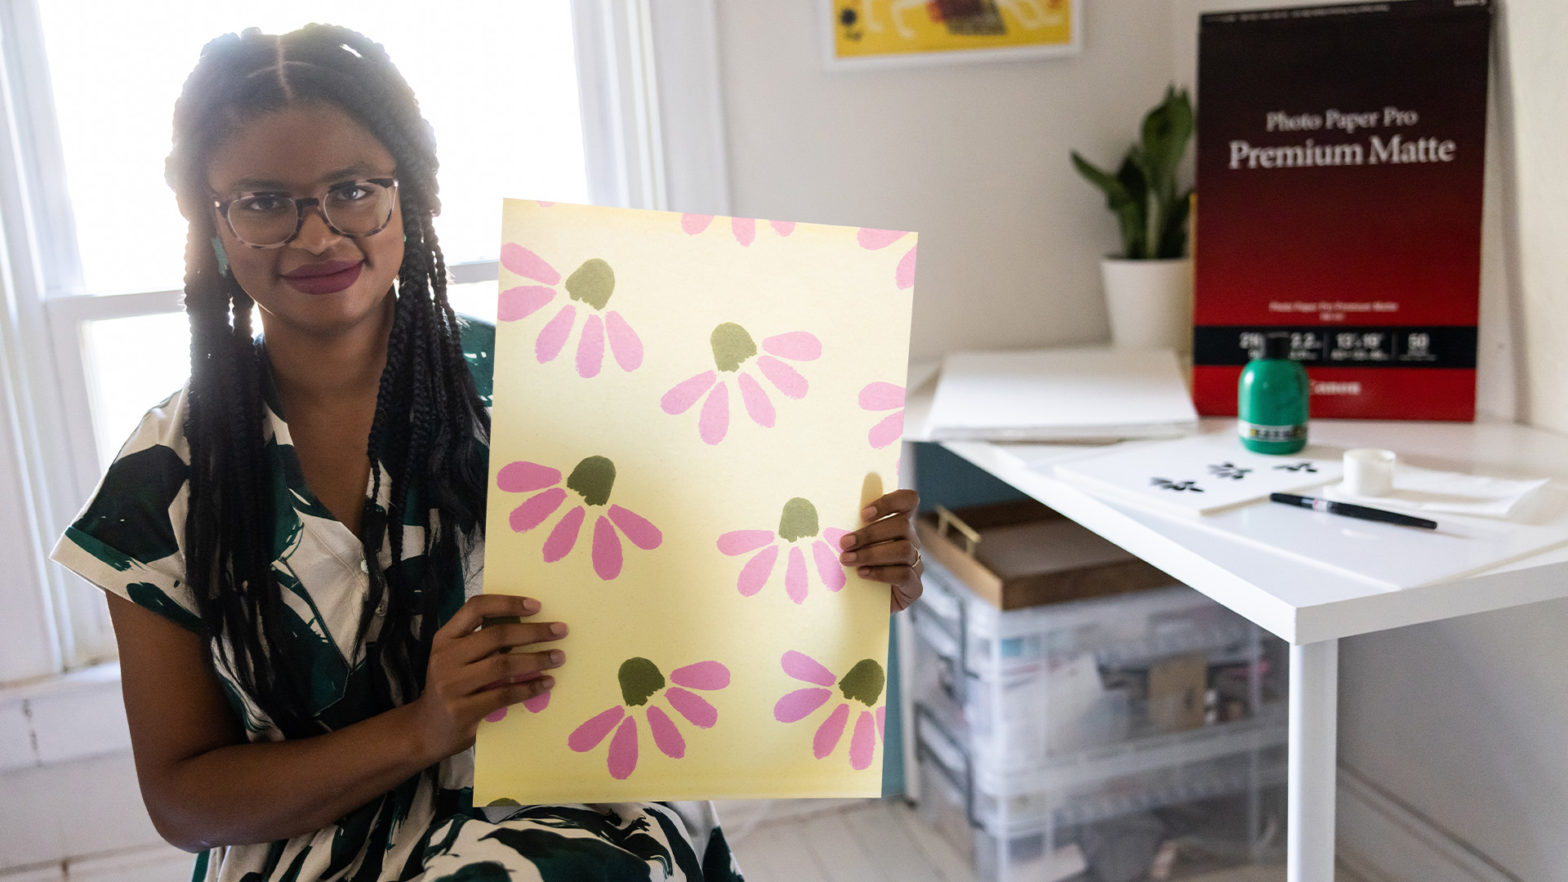 Here's How Alyissa Johnson Is Using Her Creativity To Turn Her Passions Into Profit